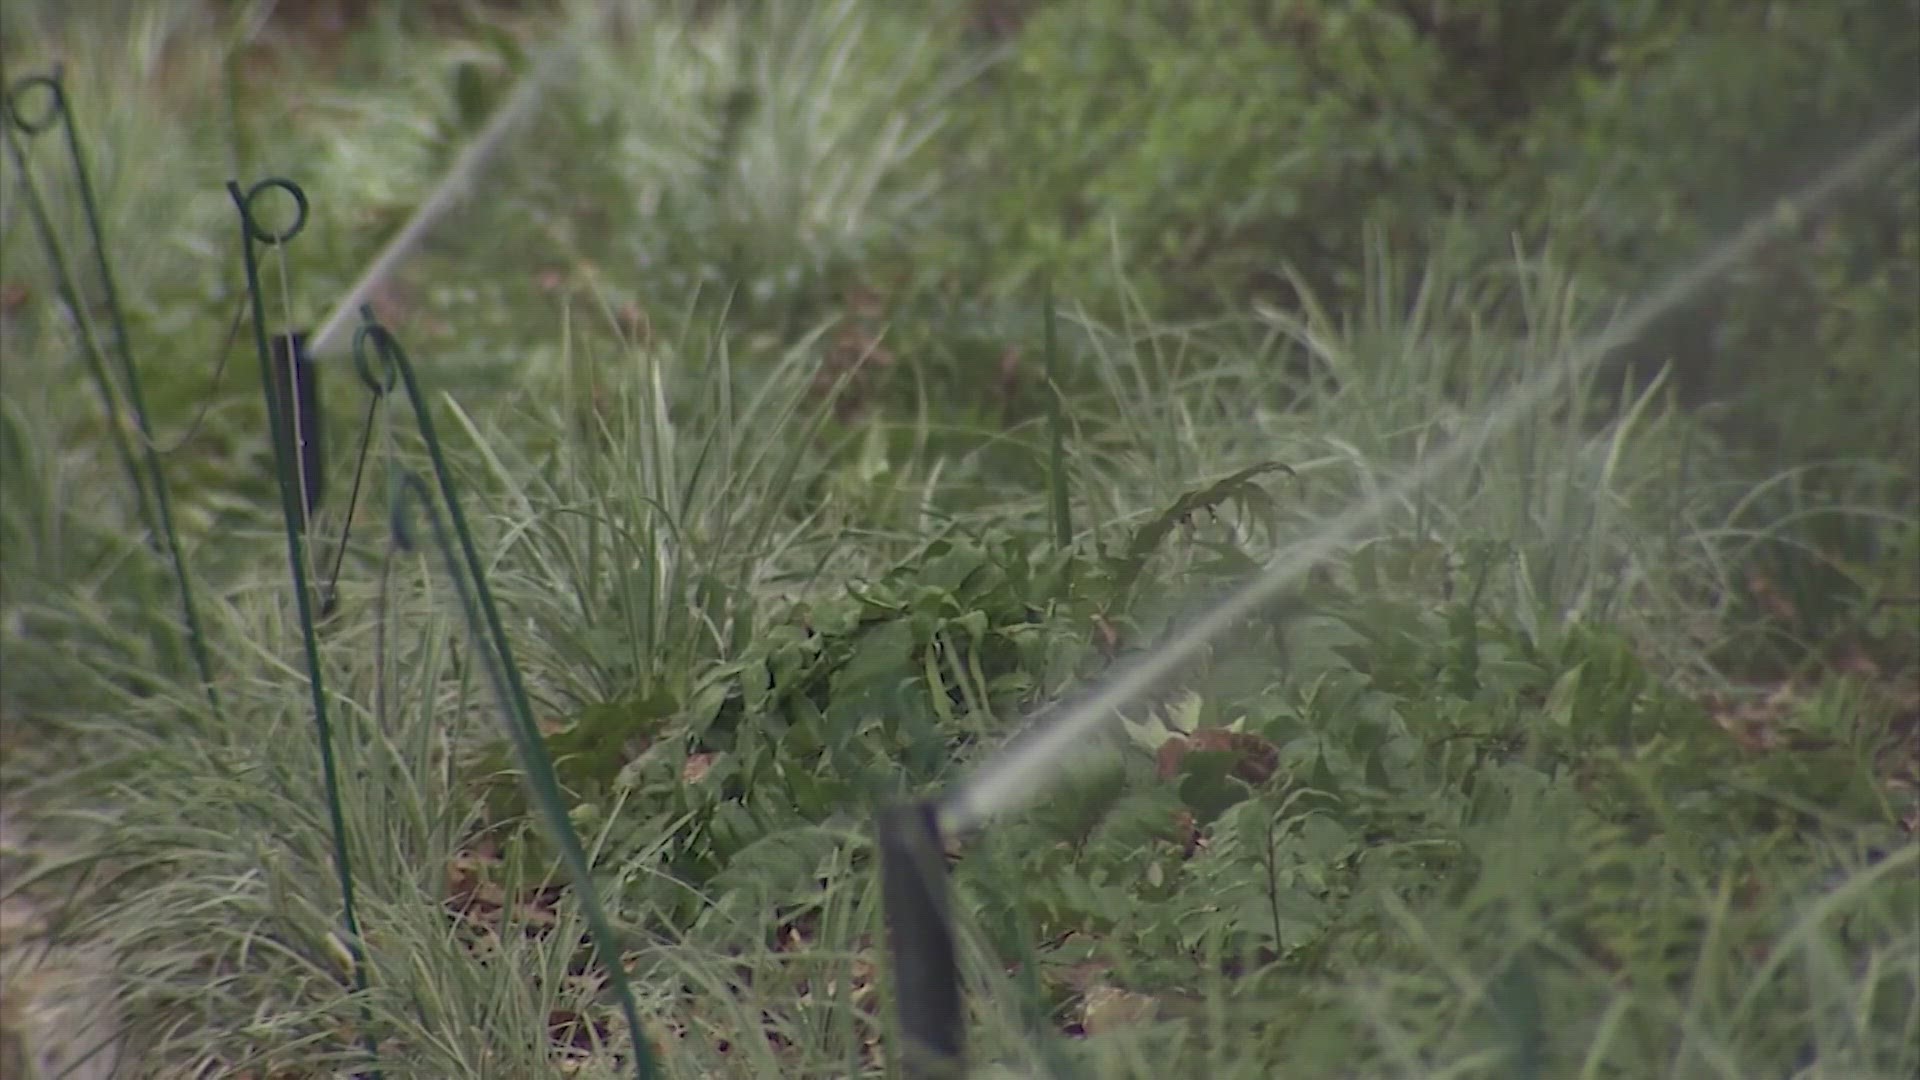 The city is entering "Stage Two" of its drought plan which limits outdoor water usage to specific times. Anyone who violates the watering times could be fined.